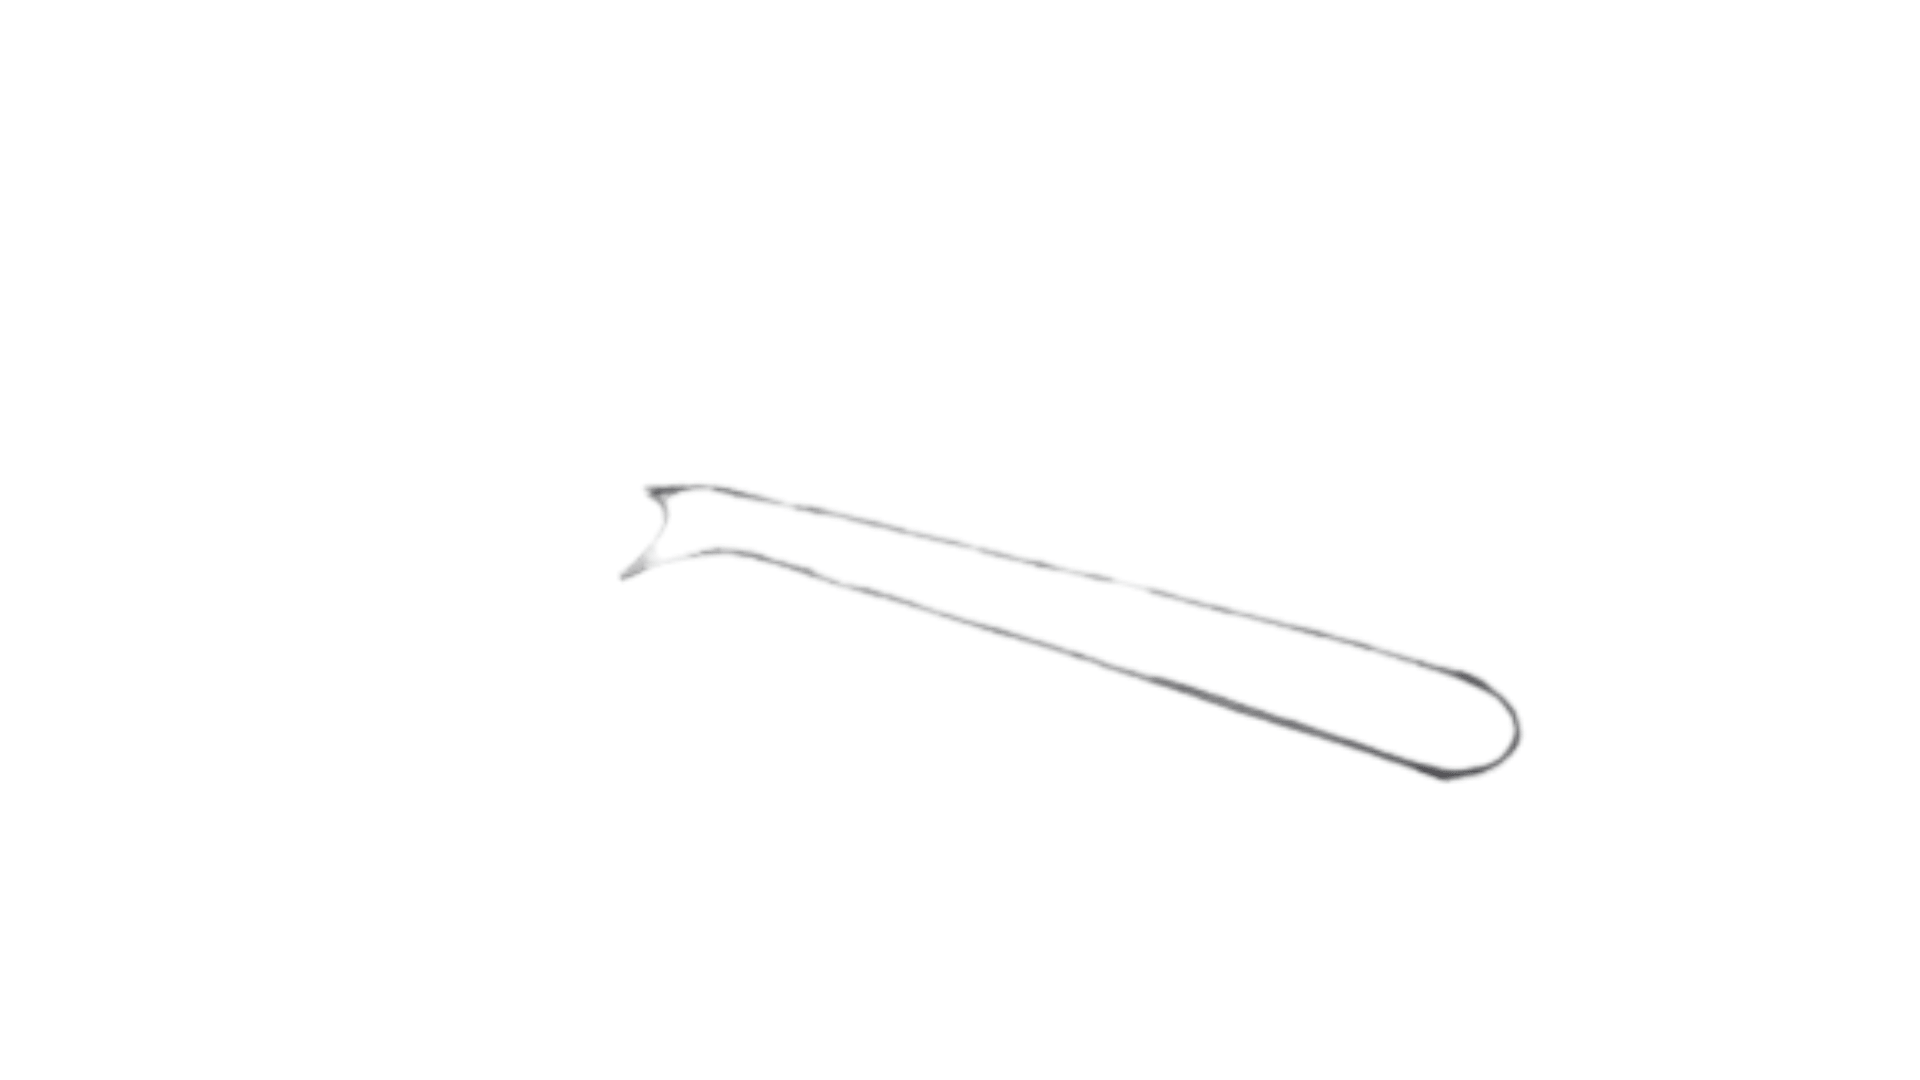 How To Draw Spoon Step 2